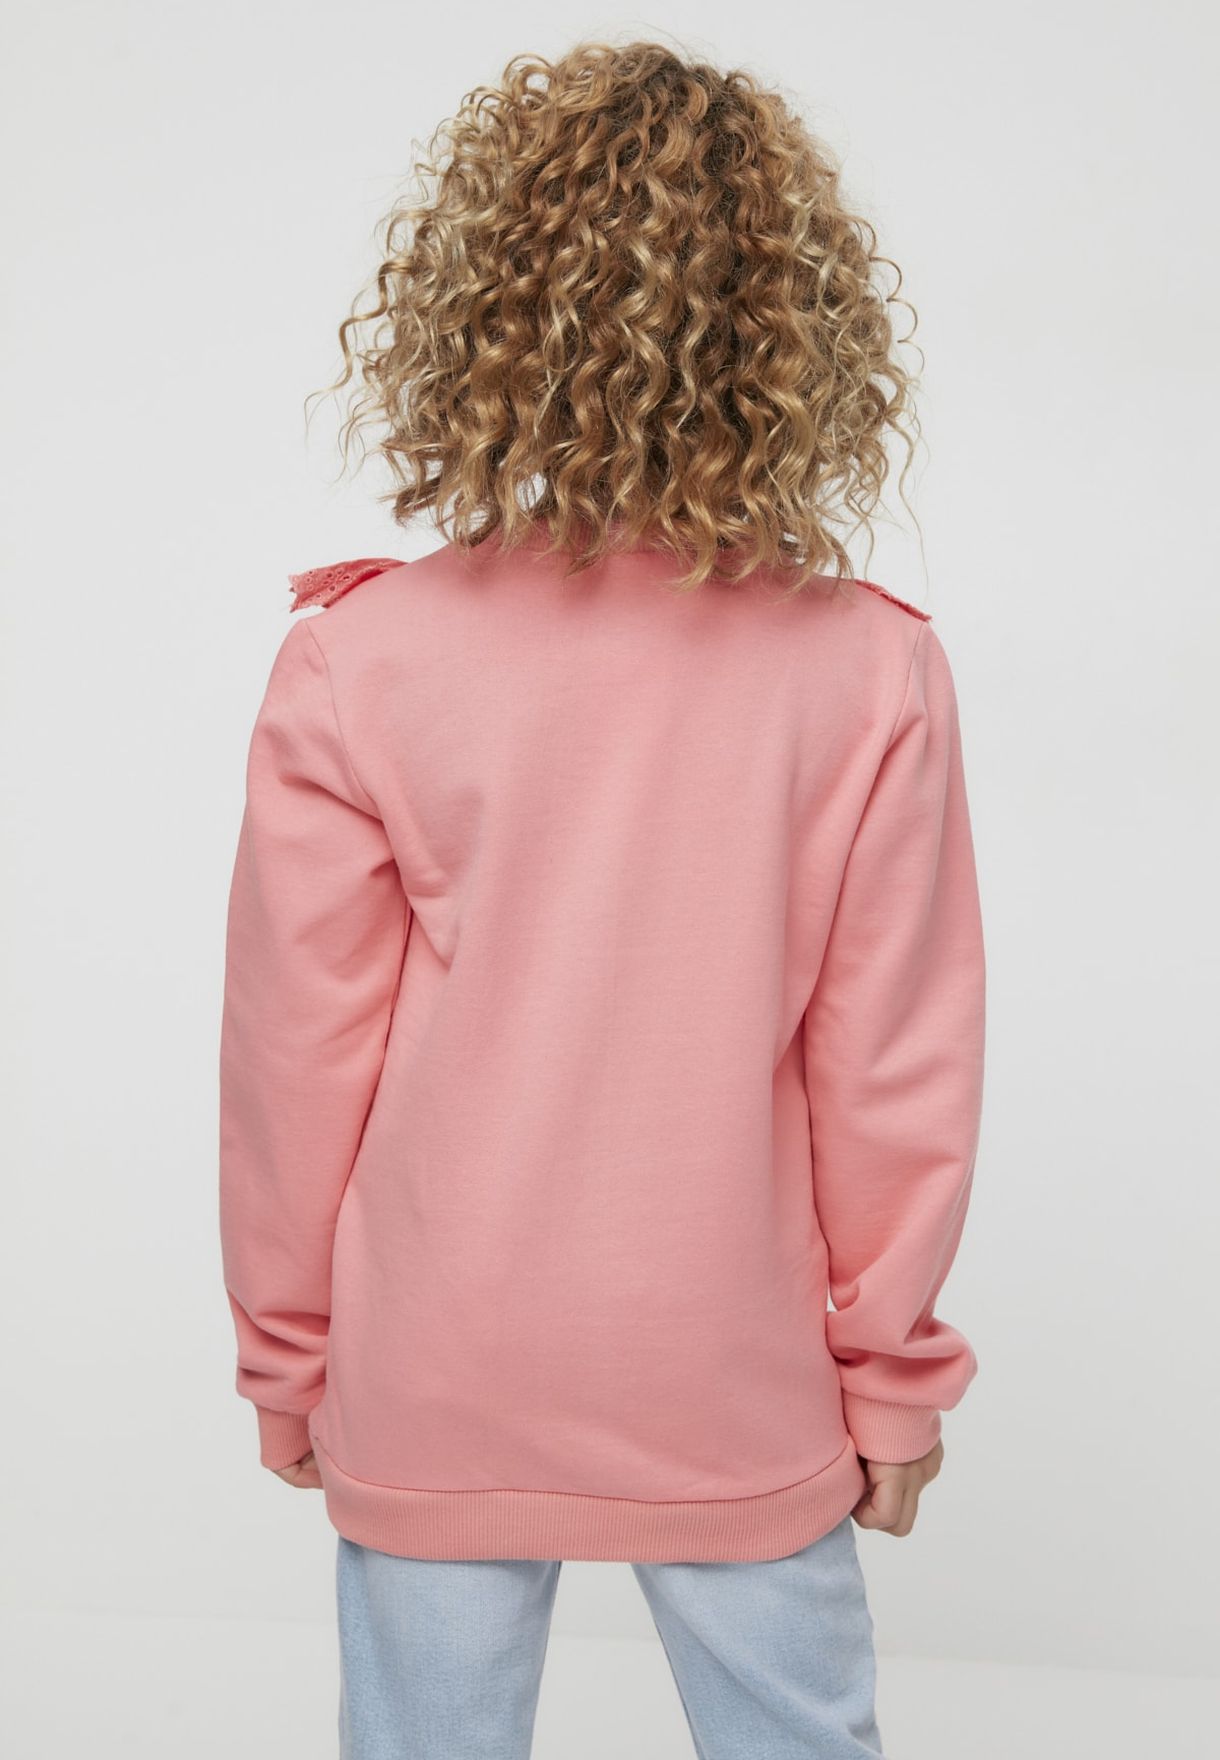 Kids Embroidered Knitted Sweatshirt